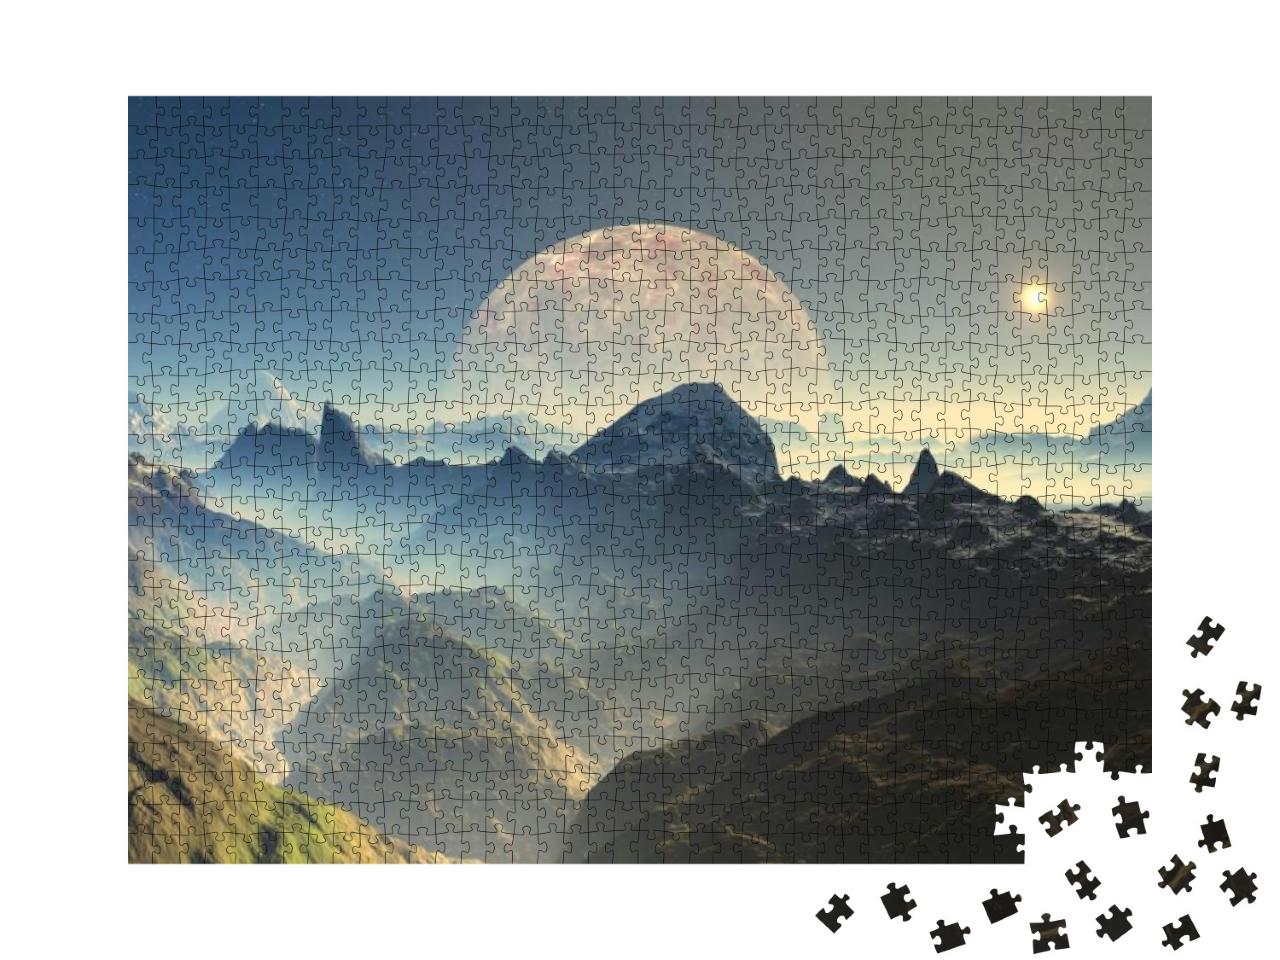 3D Rendered Fantasy Alien Planet... Jigsaw Puzzle with 1000 pieces